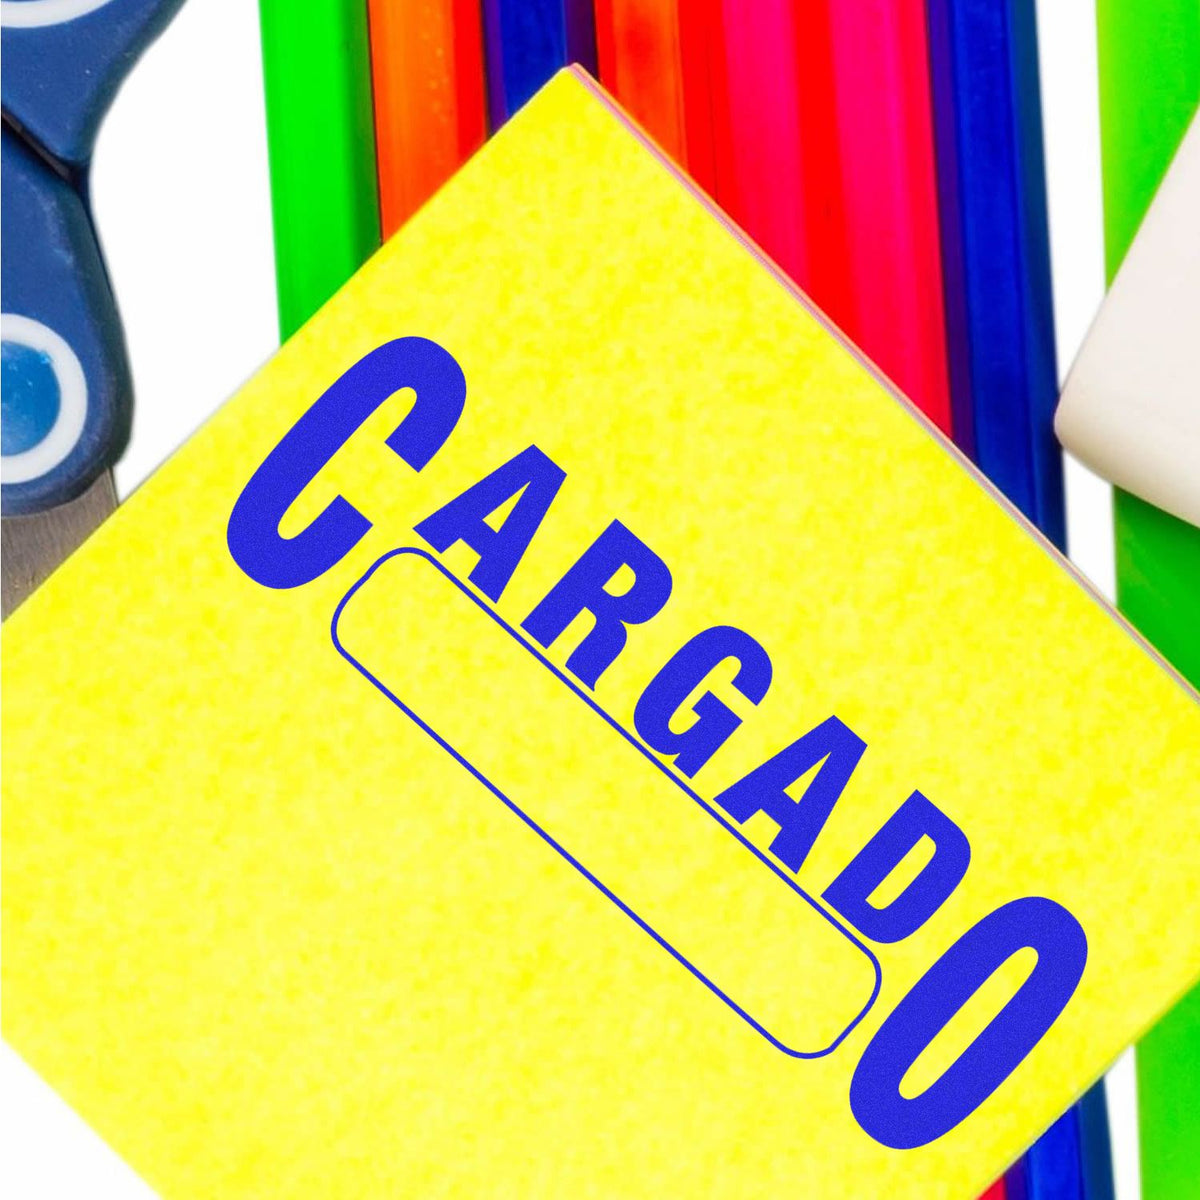 Large Cargado Rubber Stamp In Use Photo